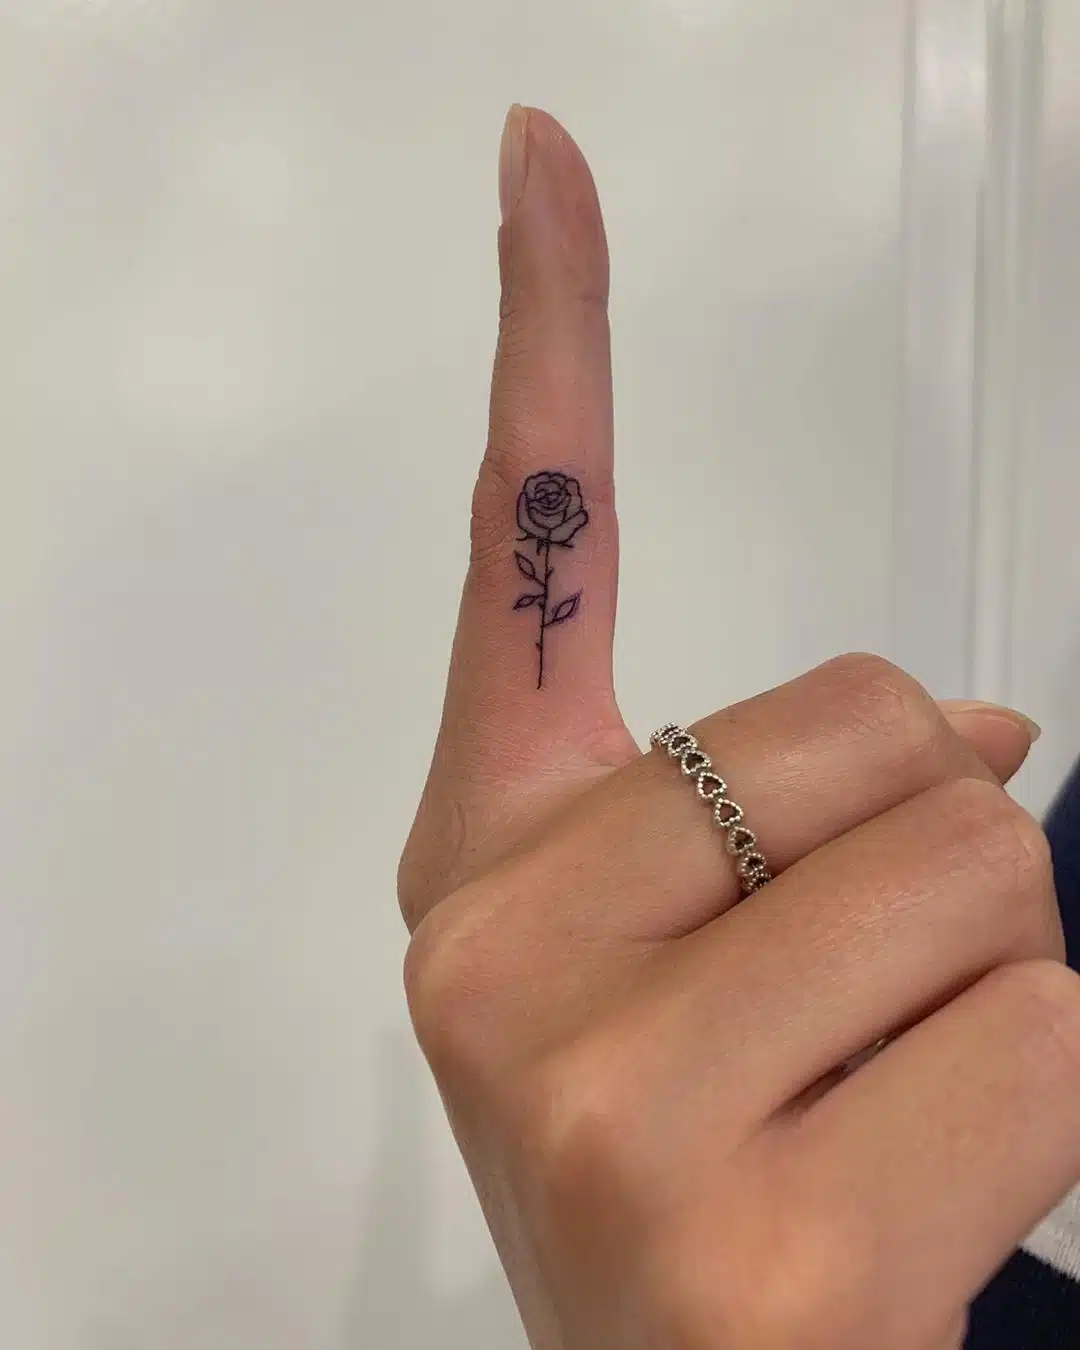 Finger tattoo placement ideas for women